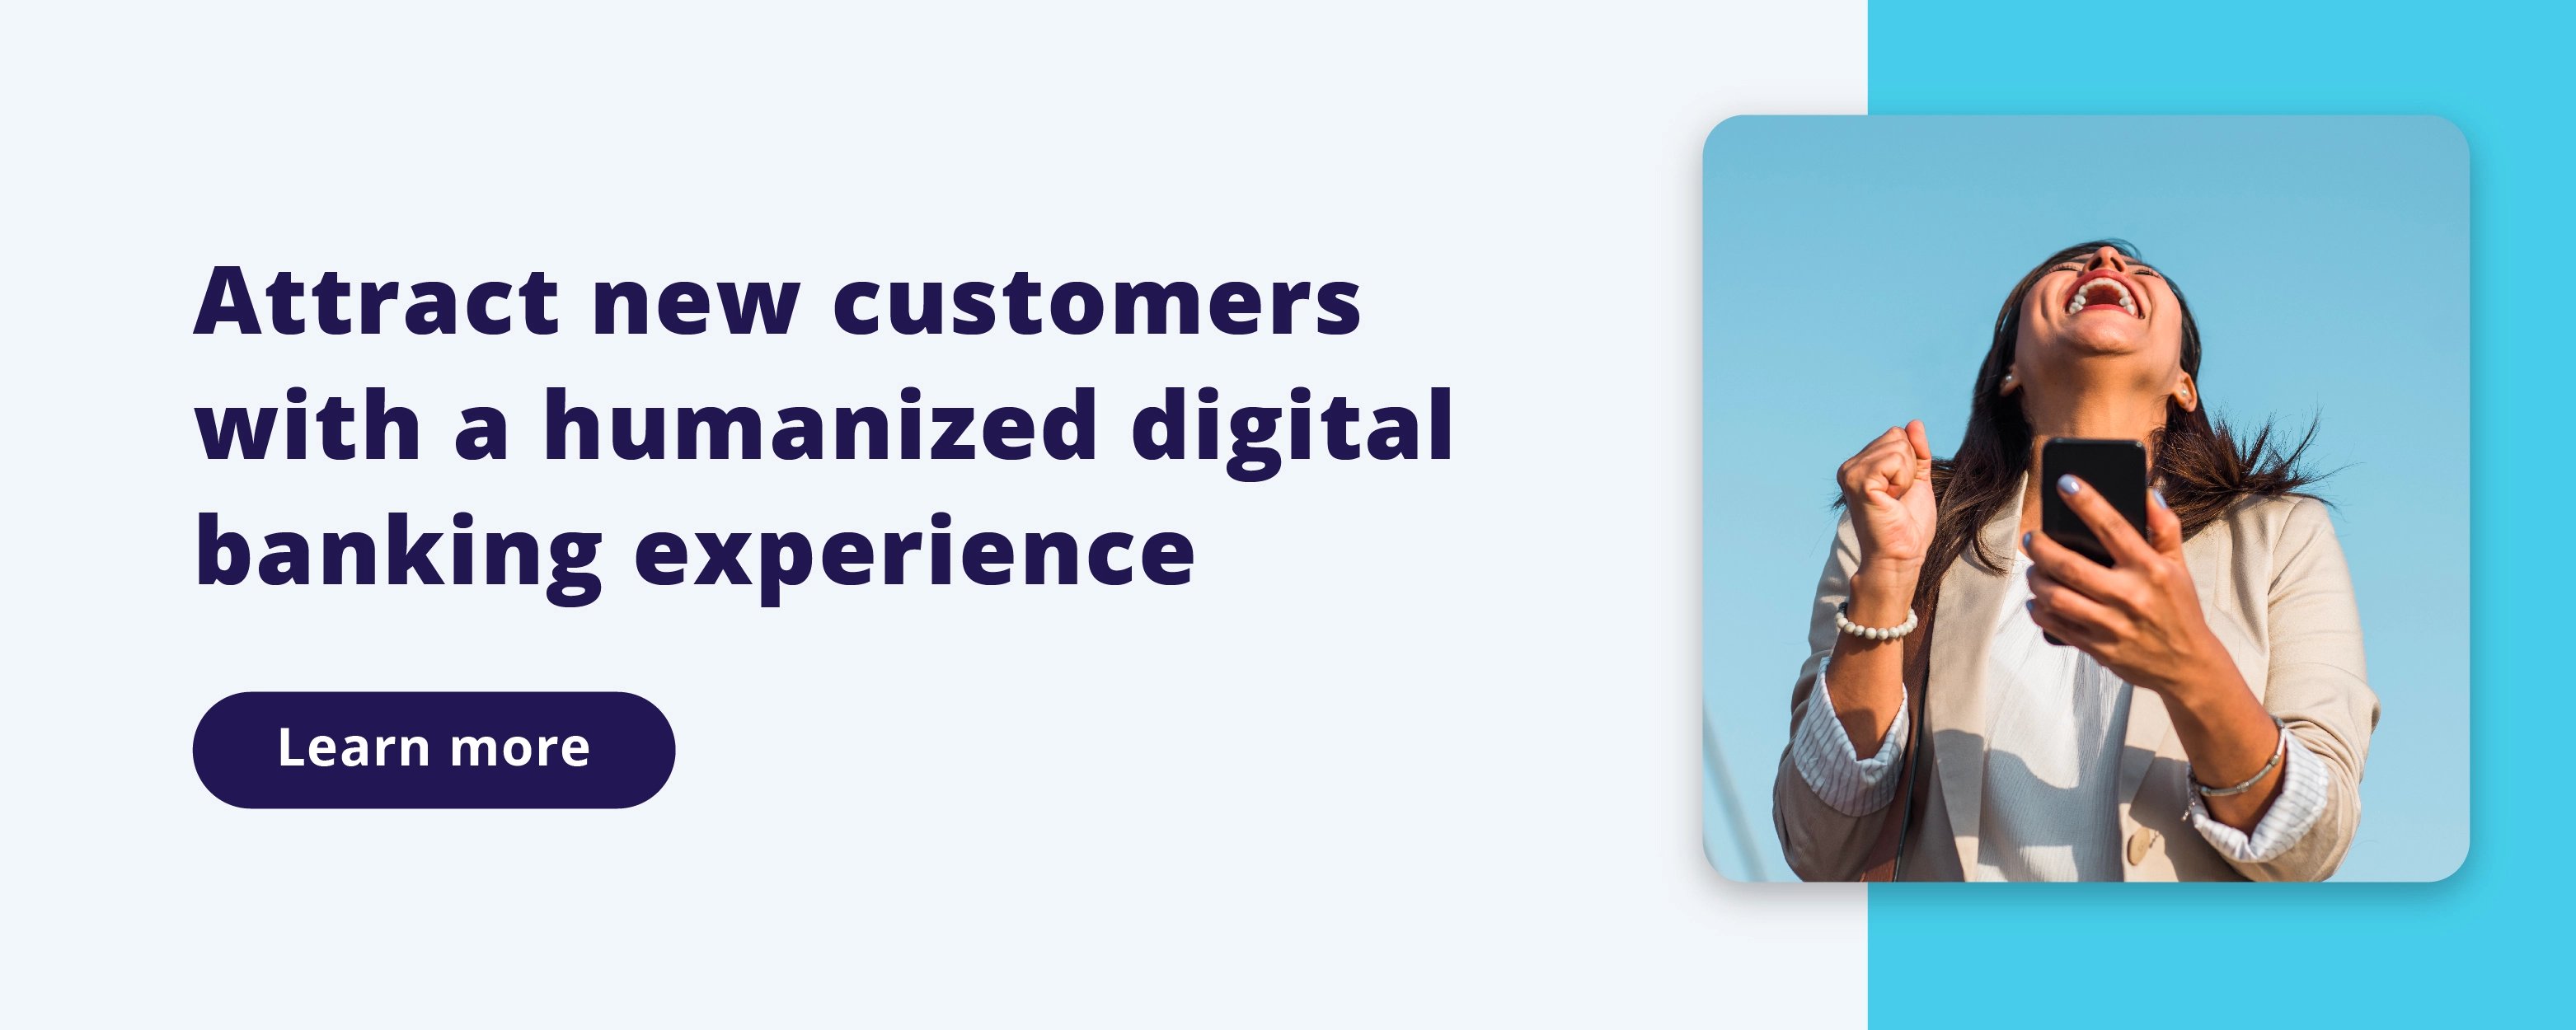 humanized digital banking experience